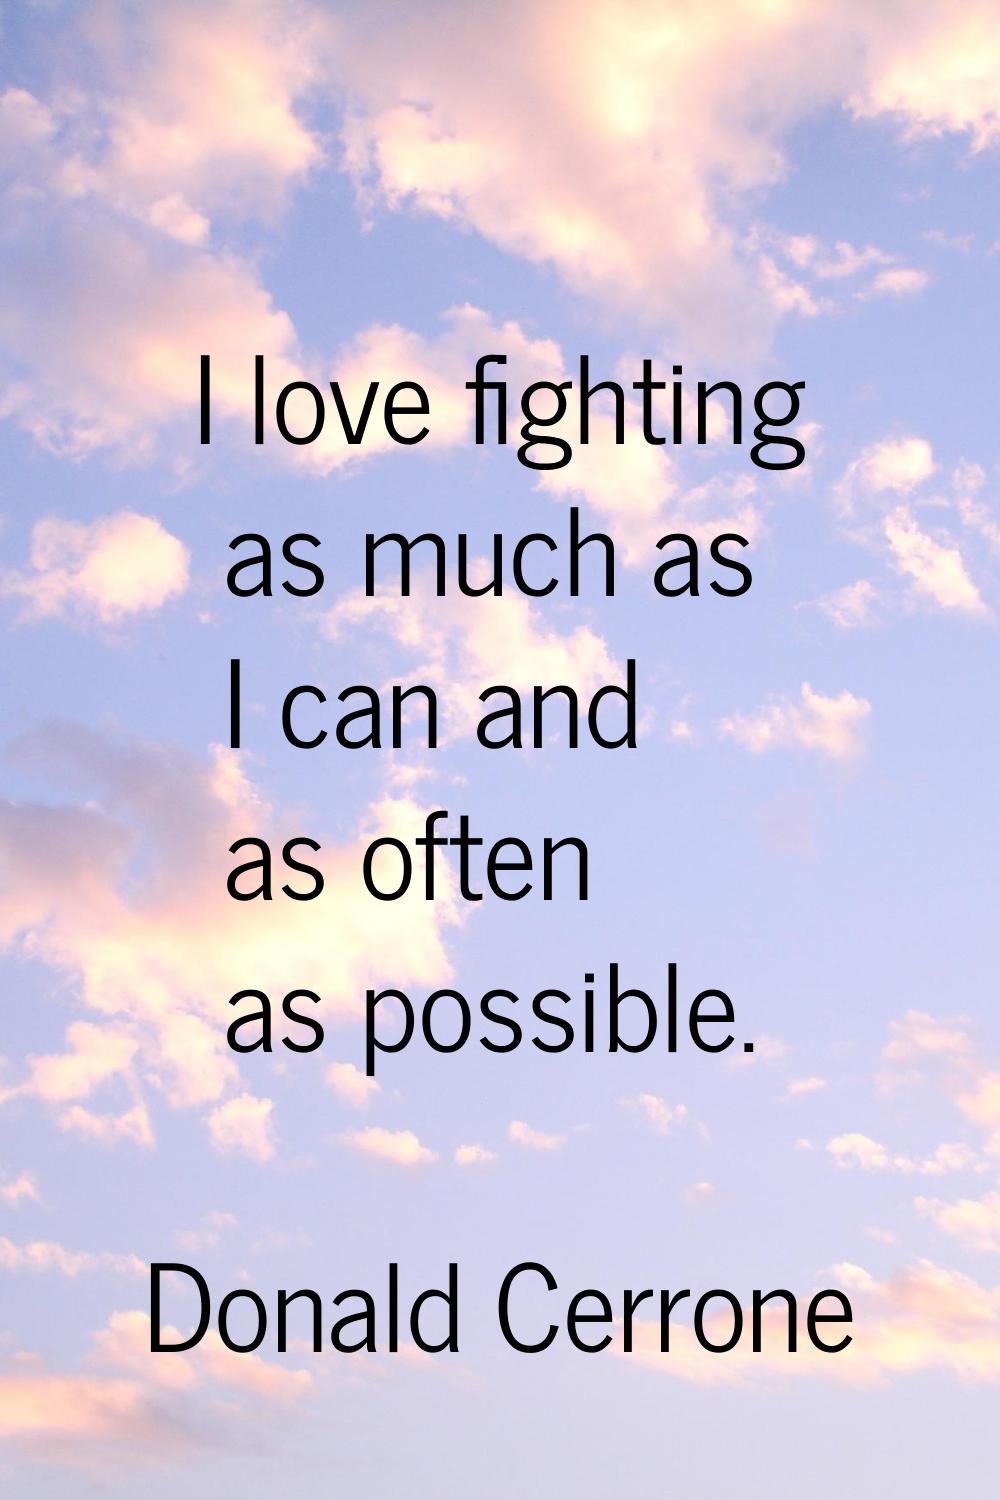 I love fighting as much as I can and as often as possible.